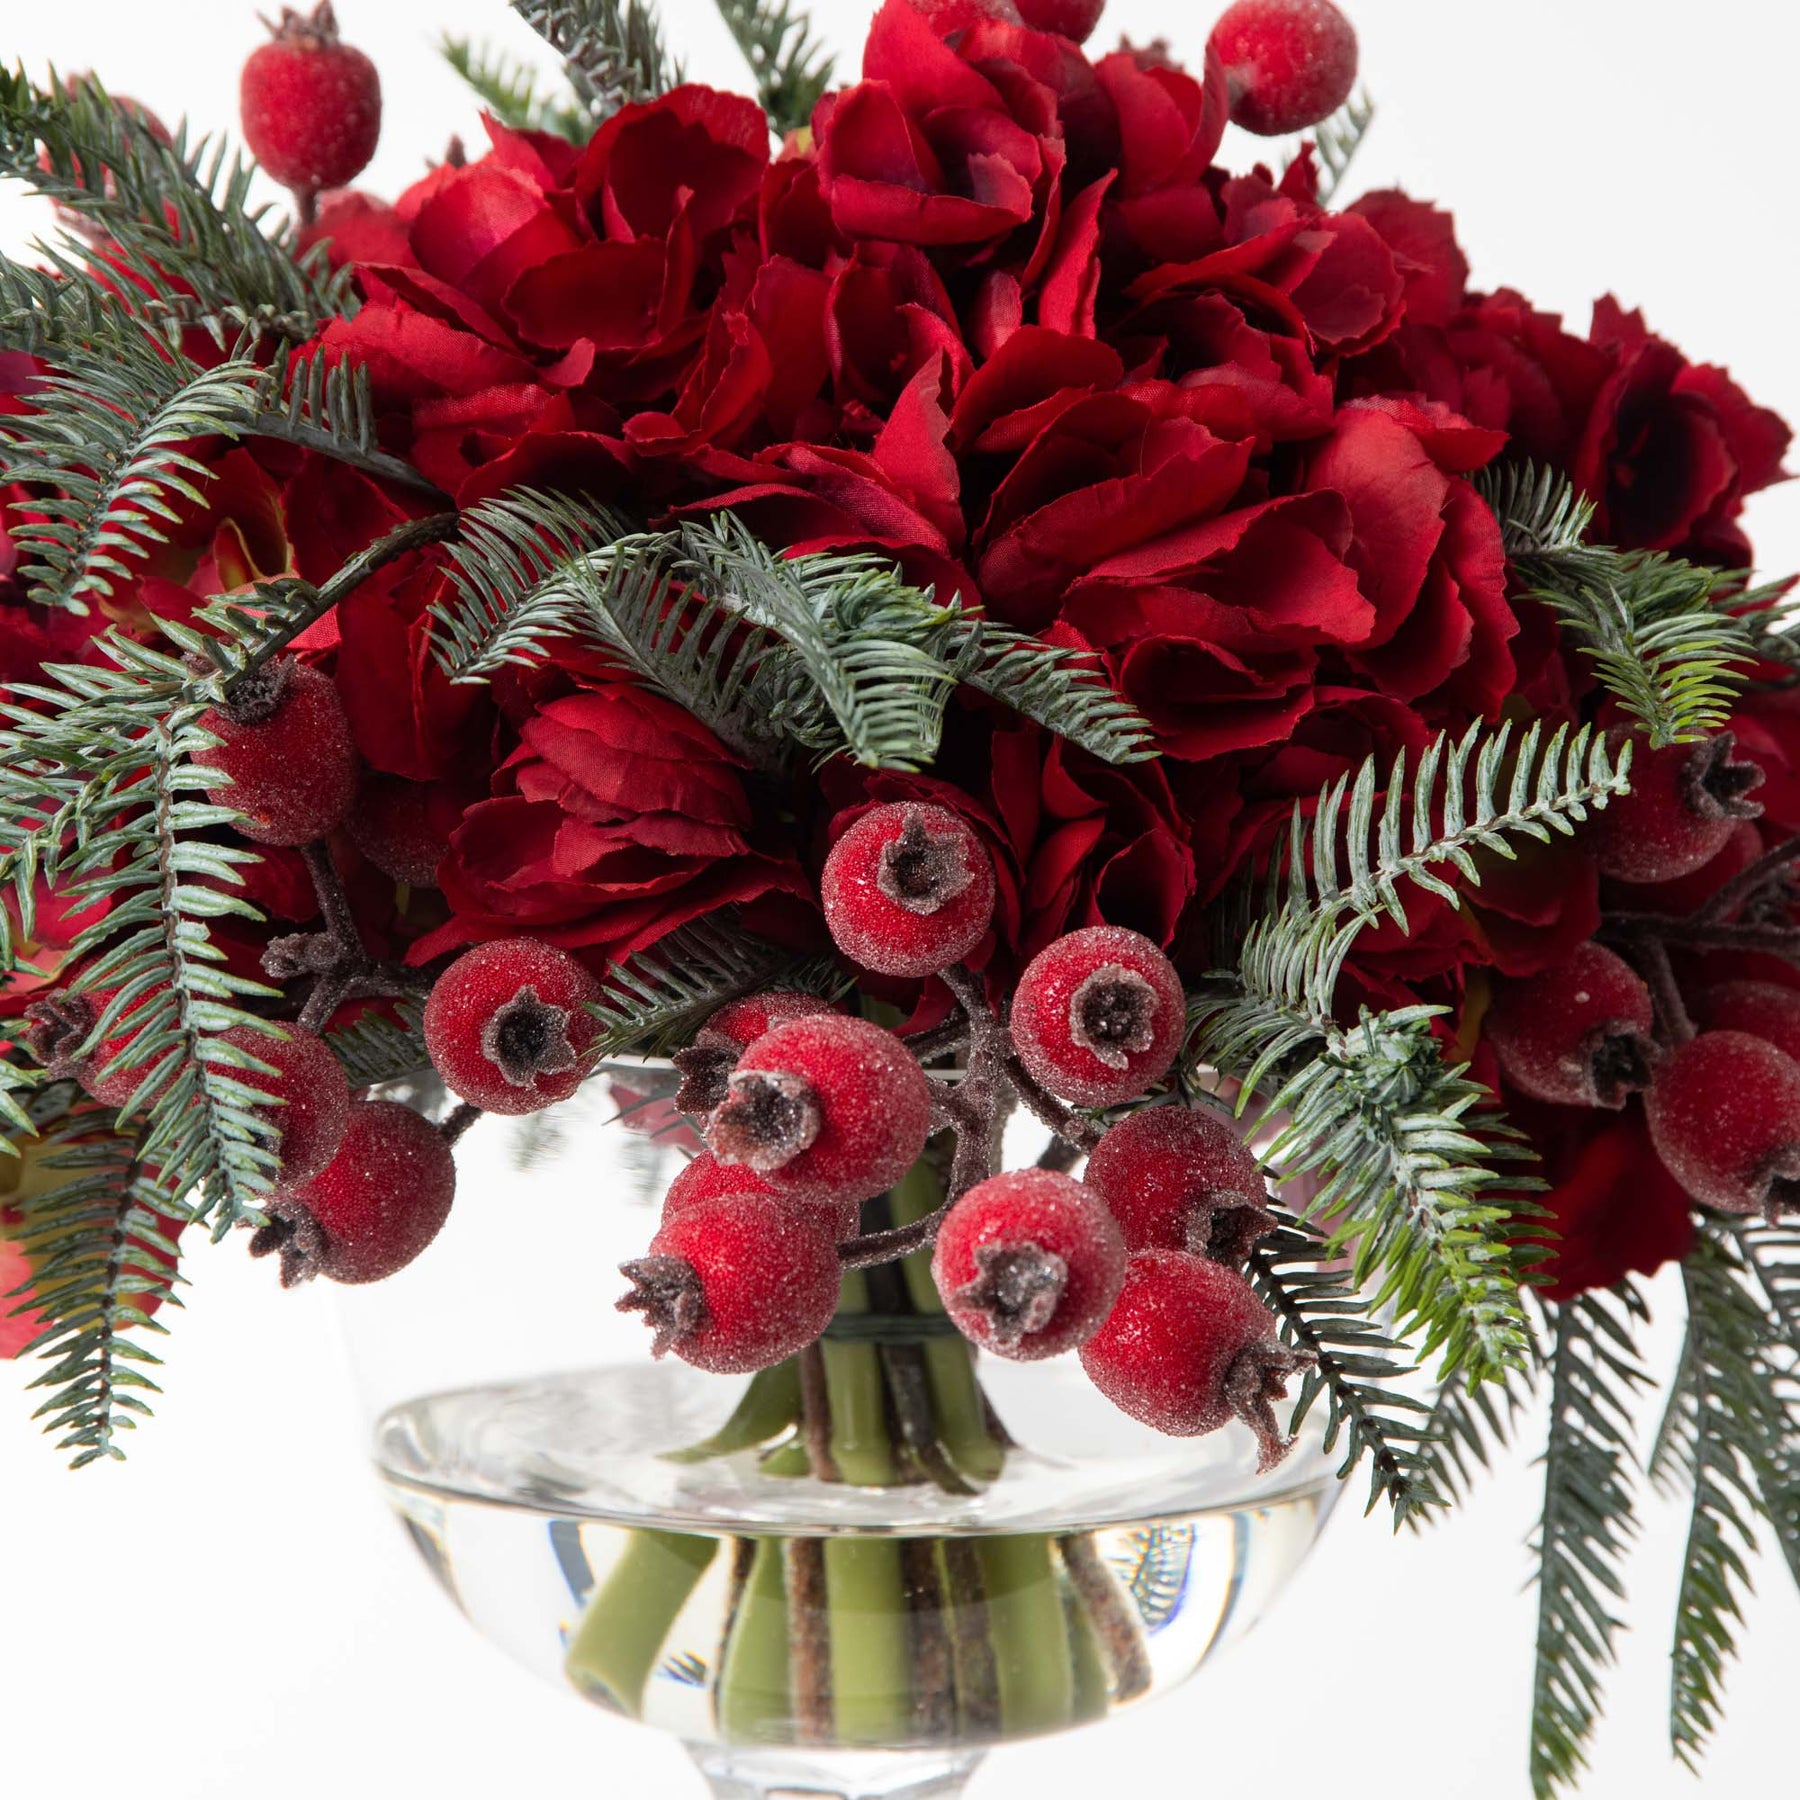 Rustic Red Christmas Flower Arrangement in Florence, AL - GREENHILL FLORIST  & GIFTS